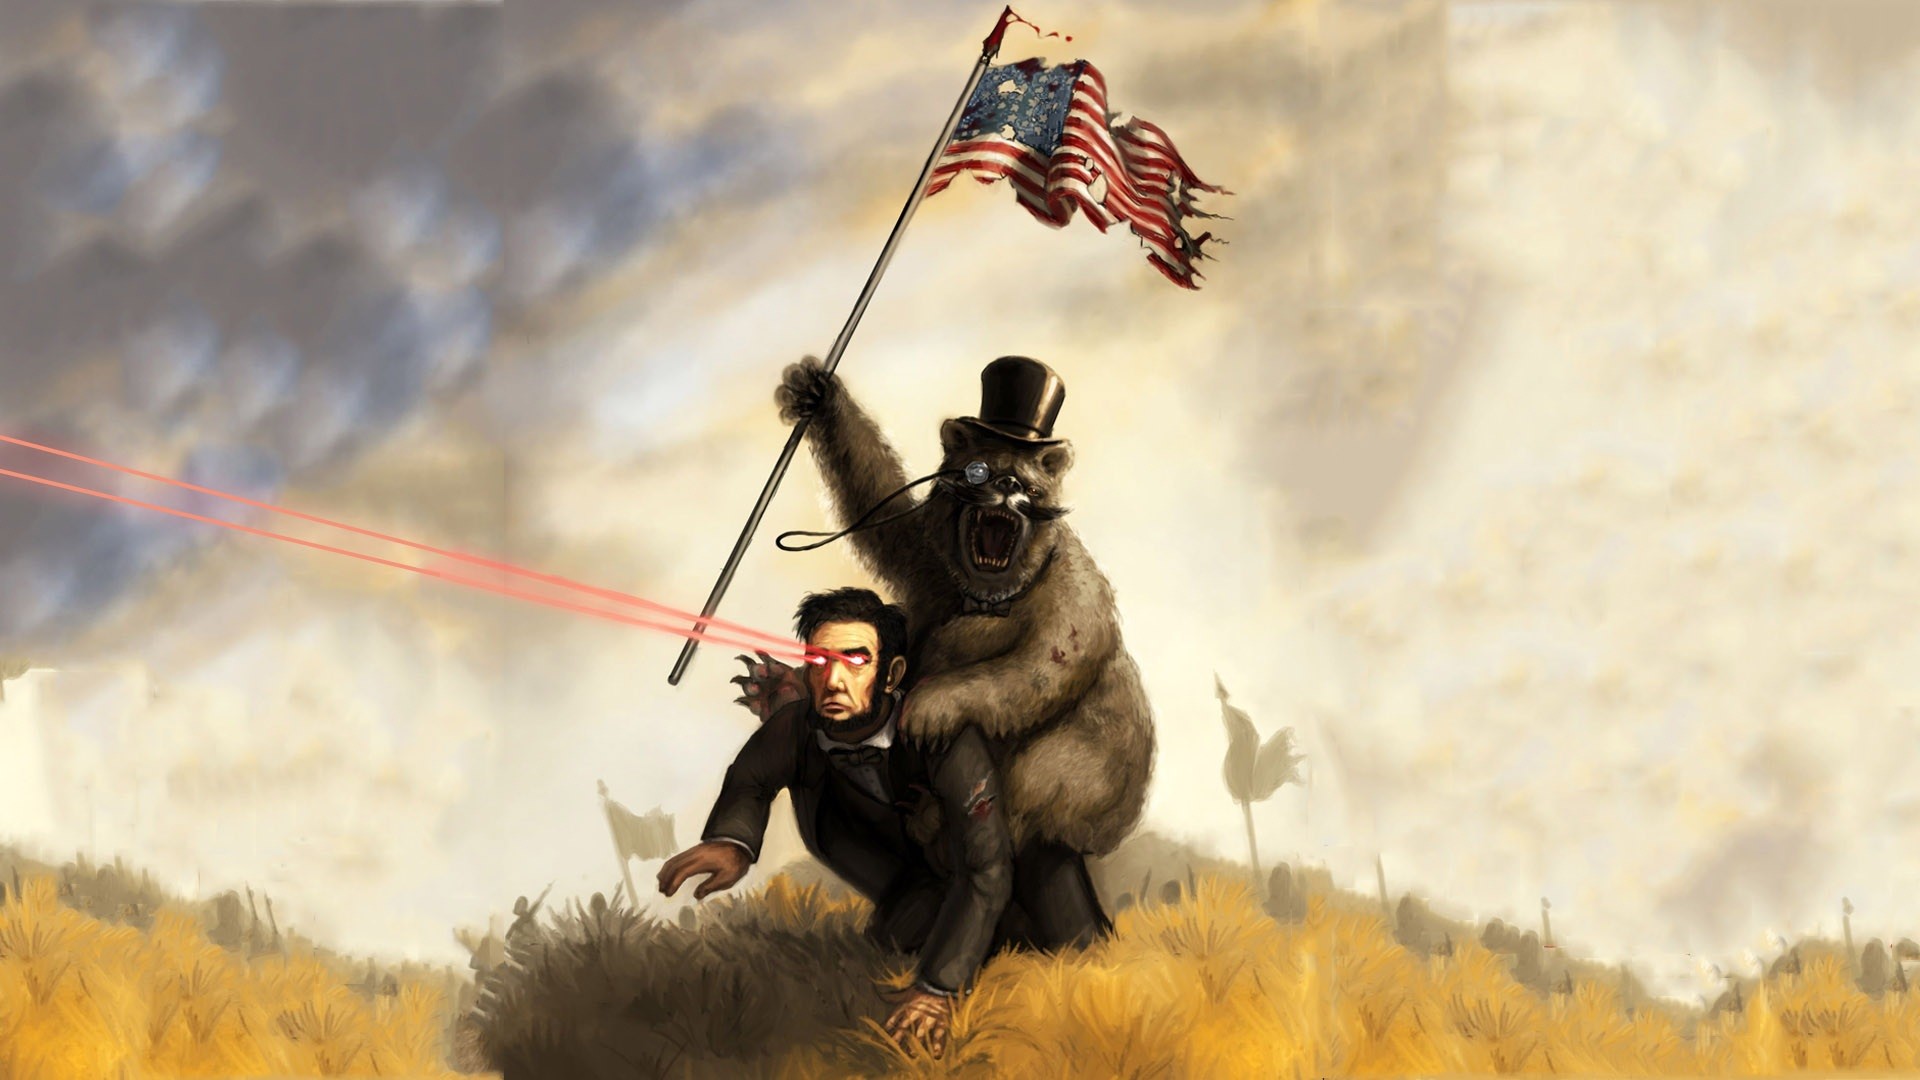 Abraham Lincoln being rode by the infamous anti slavery bear